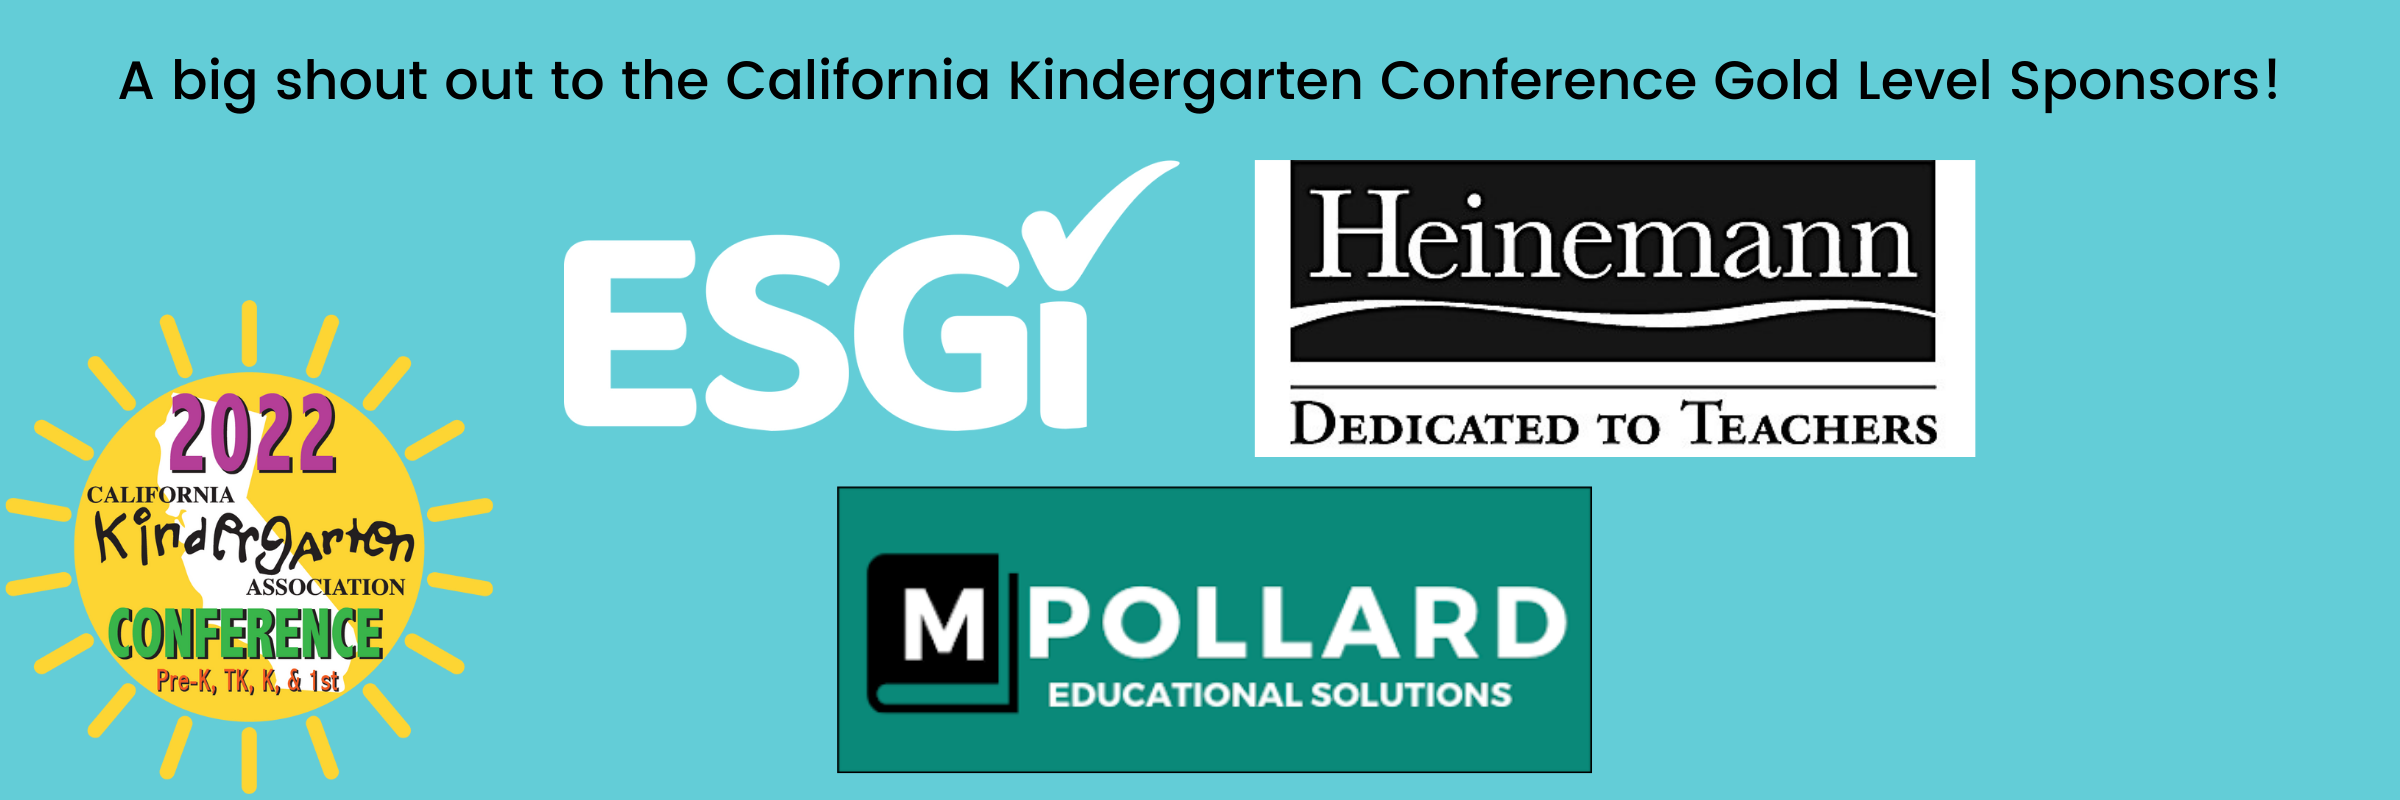 A big shout out to the California Kindergarten Association Gold Level Sponsors! (2)